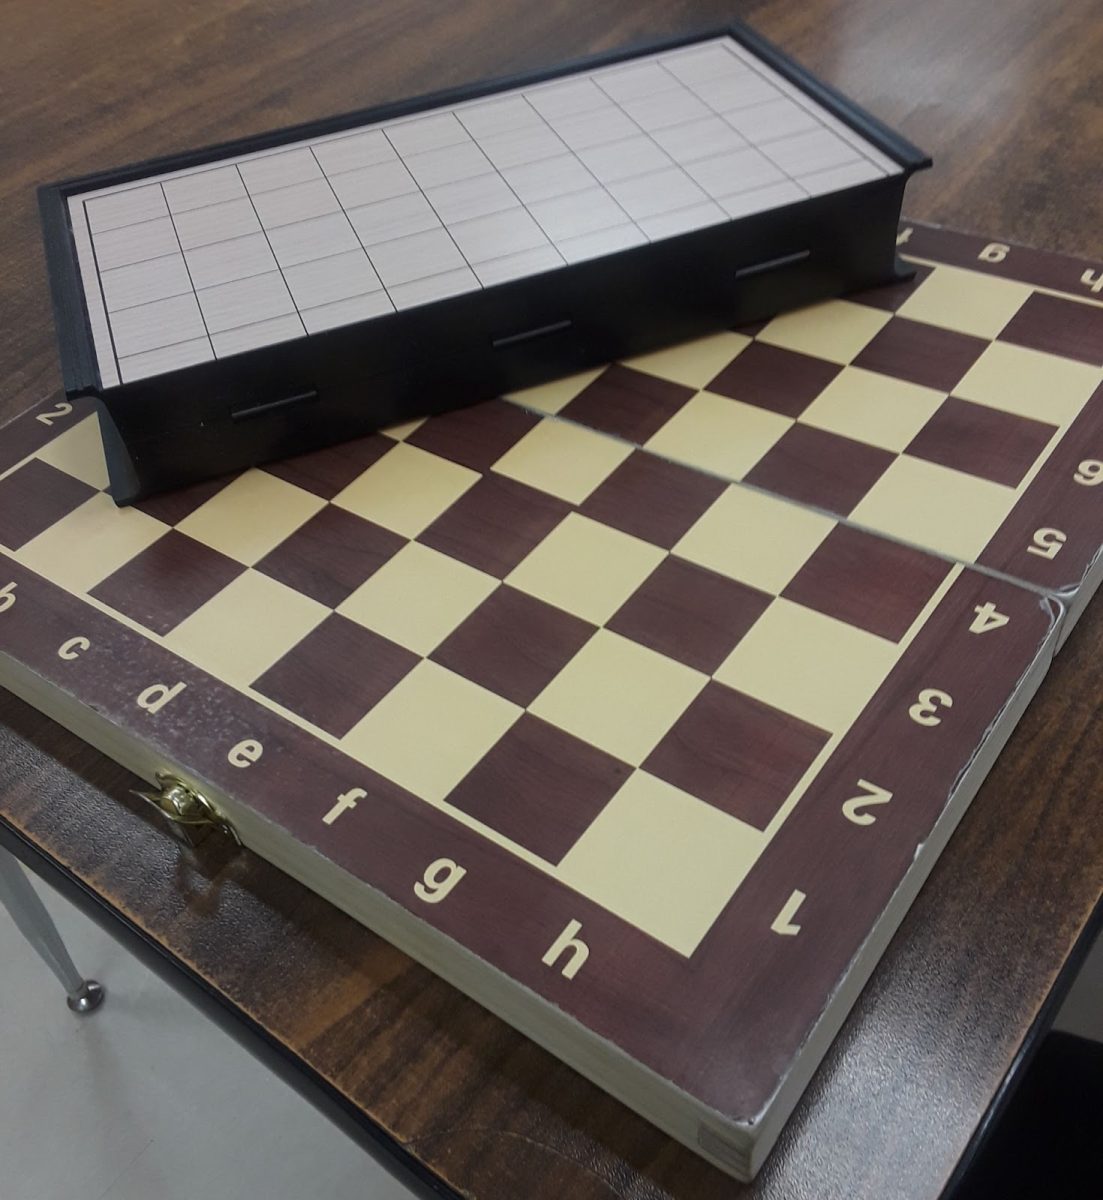 Why PVHS’s Chess Club is Interesting